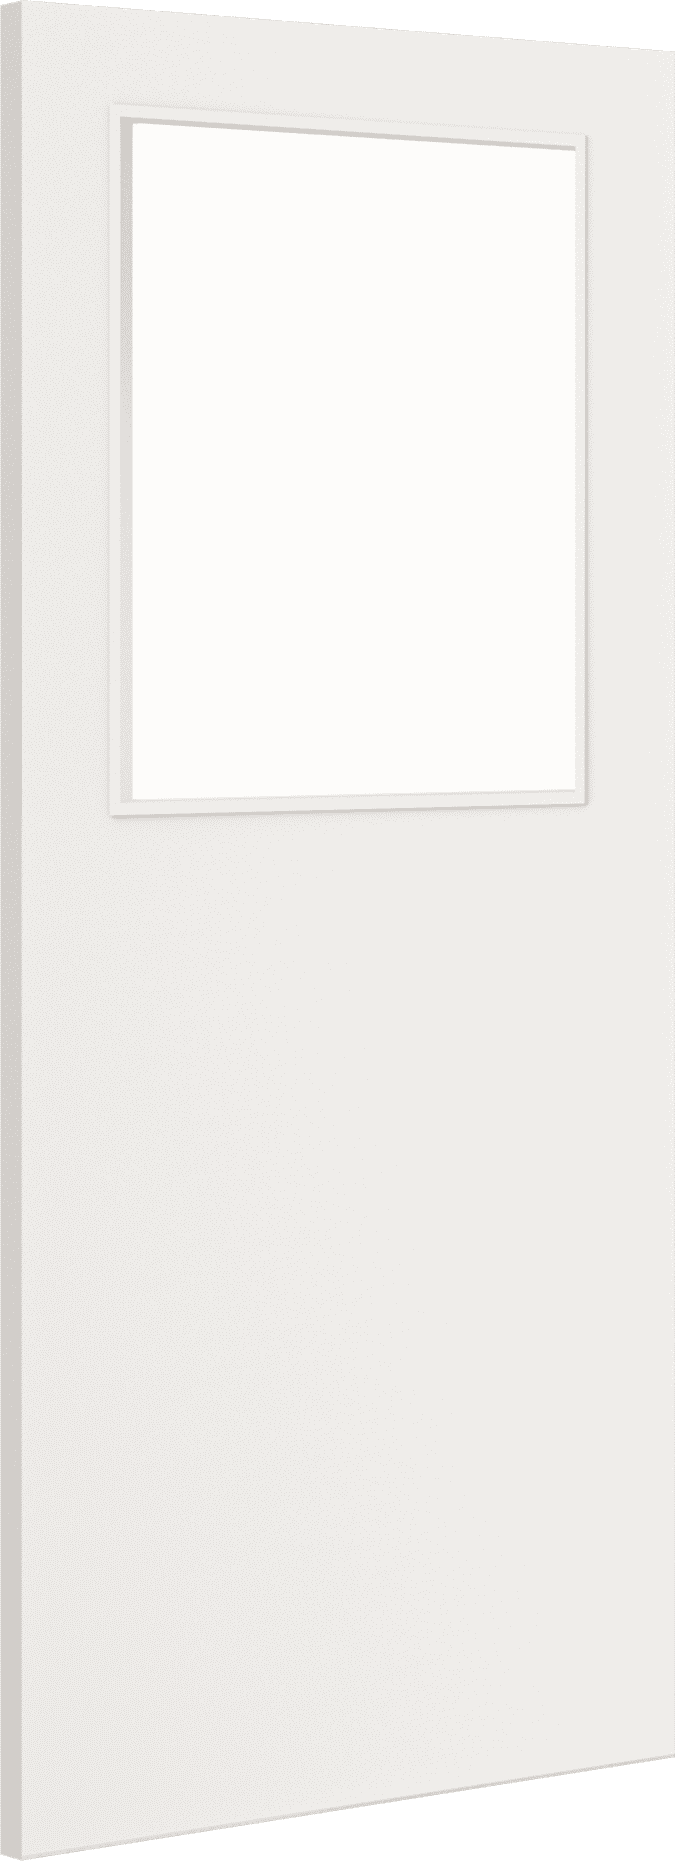 2040mm x 726mm x 44mm Architectural Paint Grade White 01 Frosted Glazed Fire Door Blank